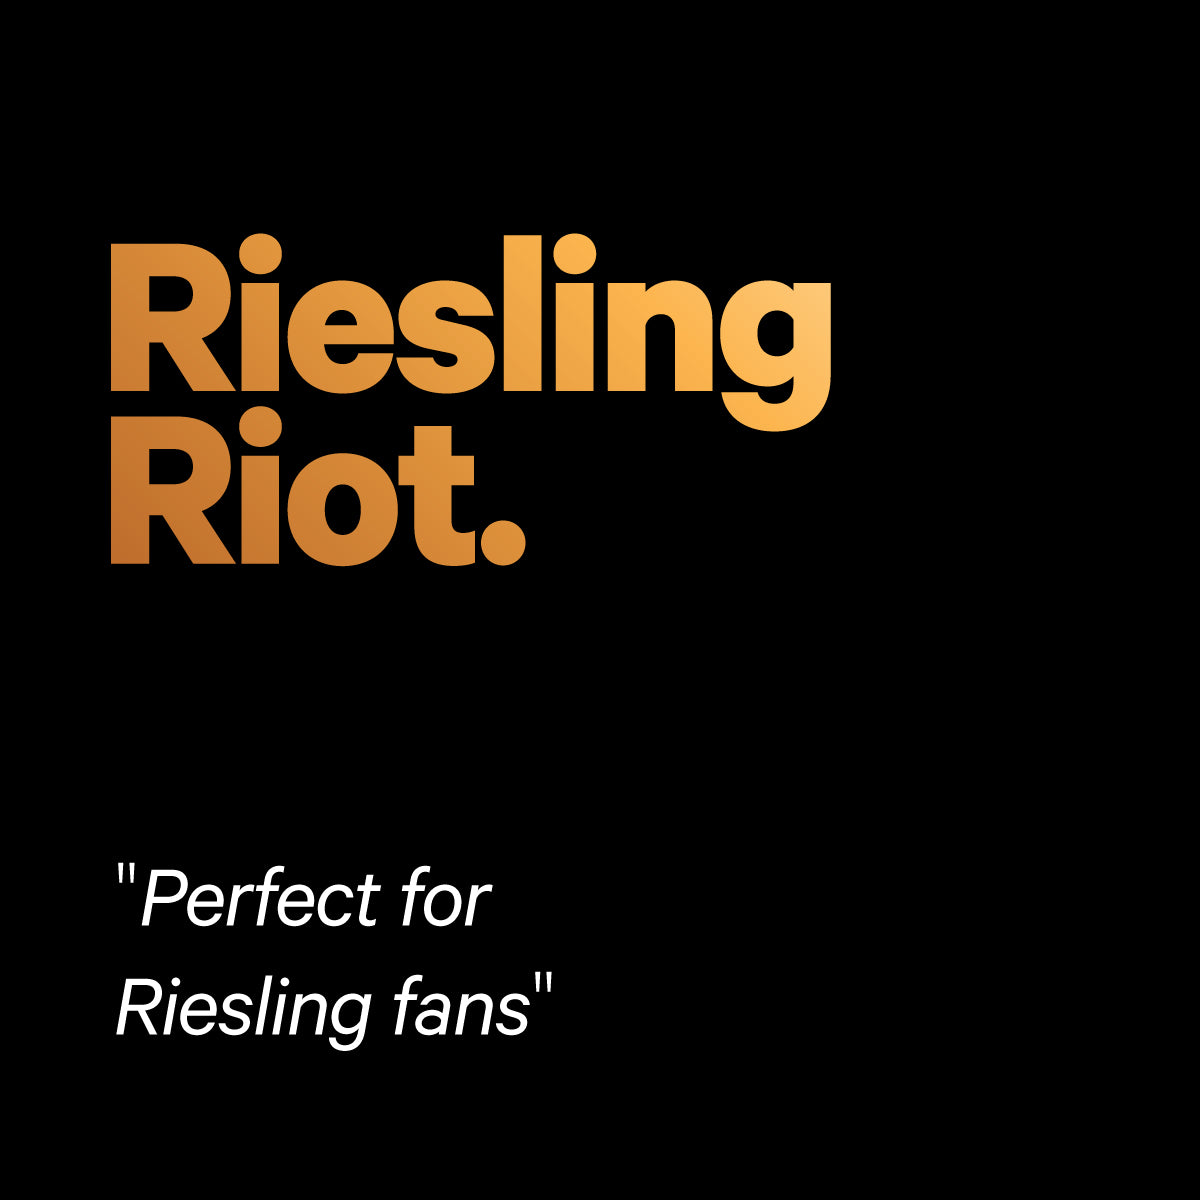 RIESLING RIOT